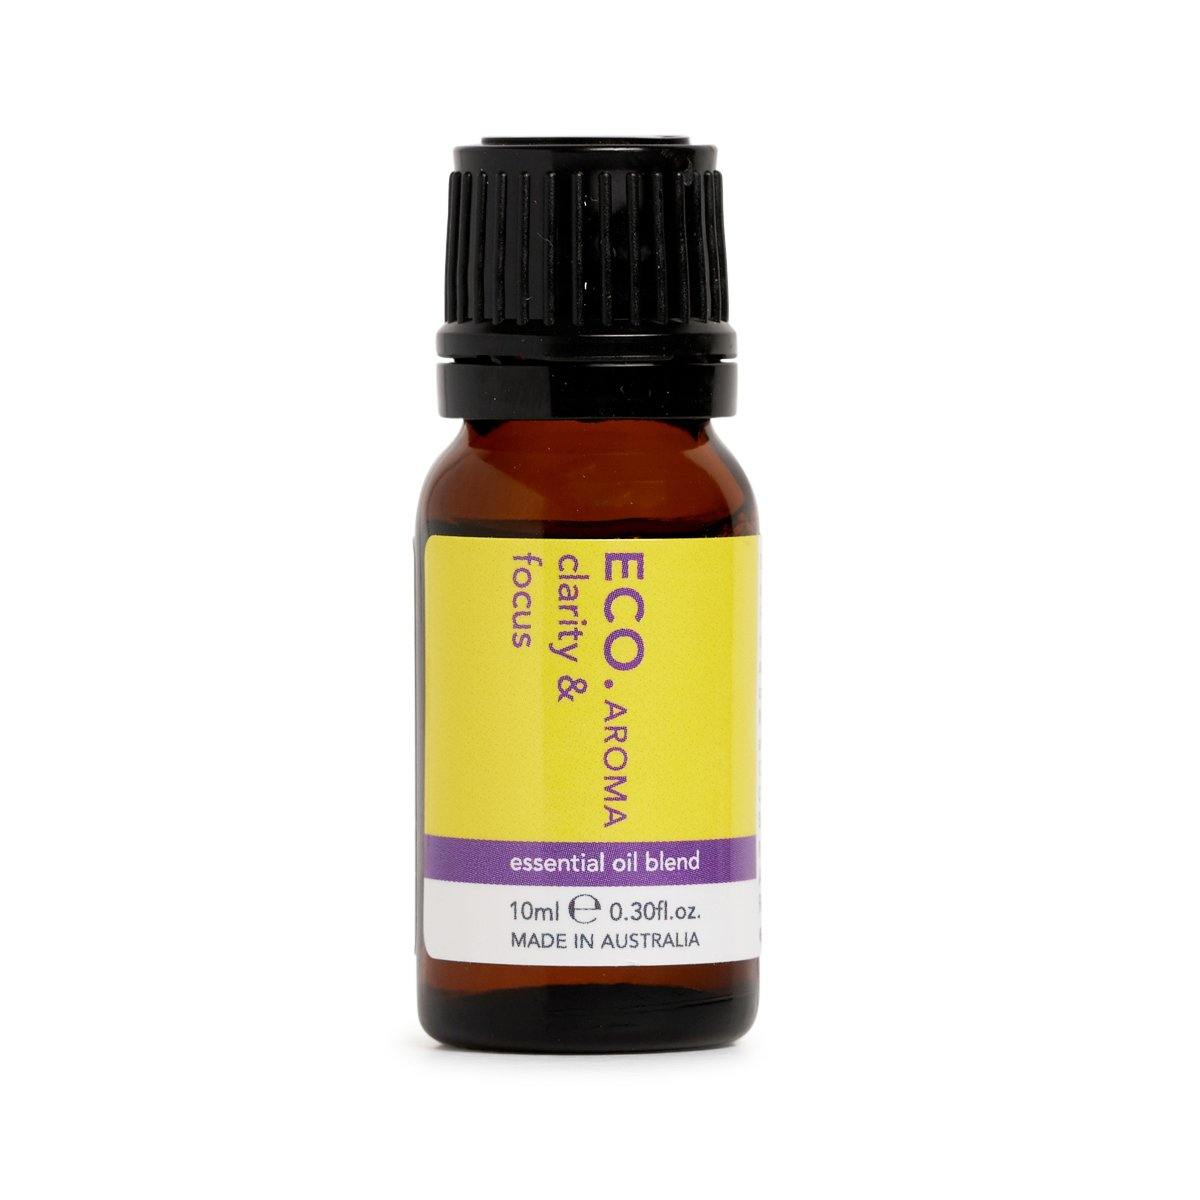 Whole Store ECO. Modern Essentials - Clarity & Focus Oil Essential Blend